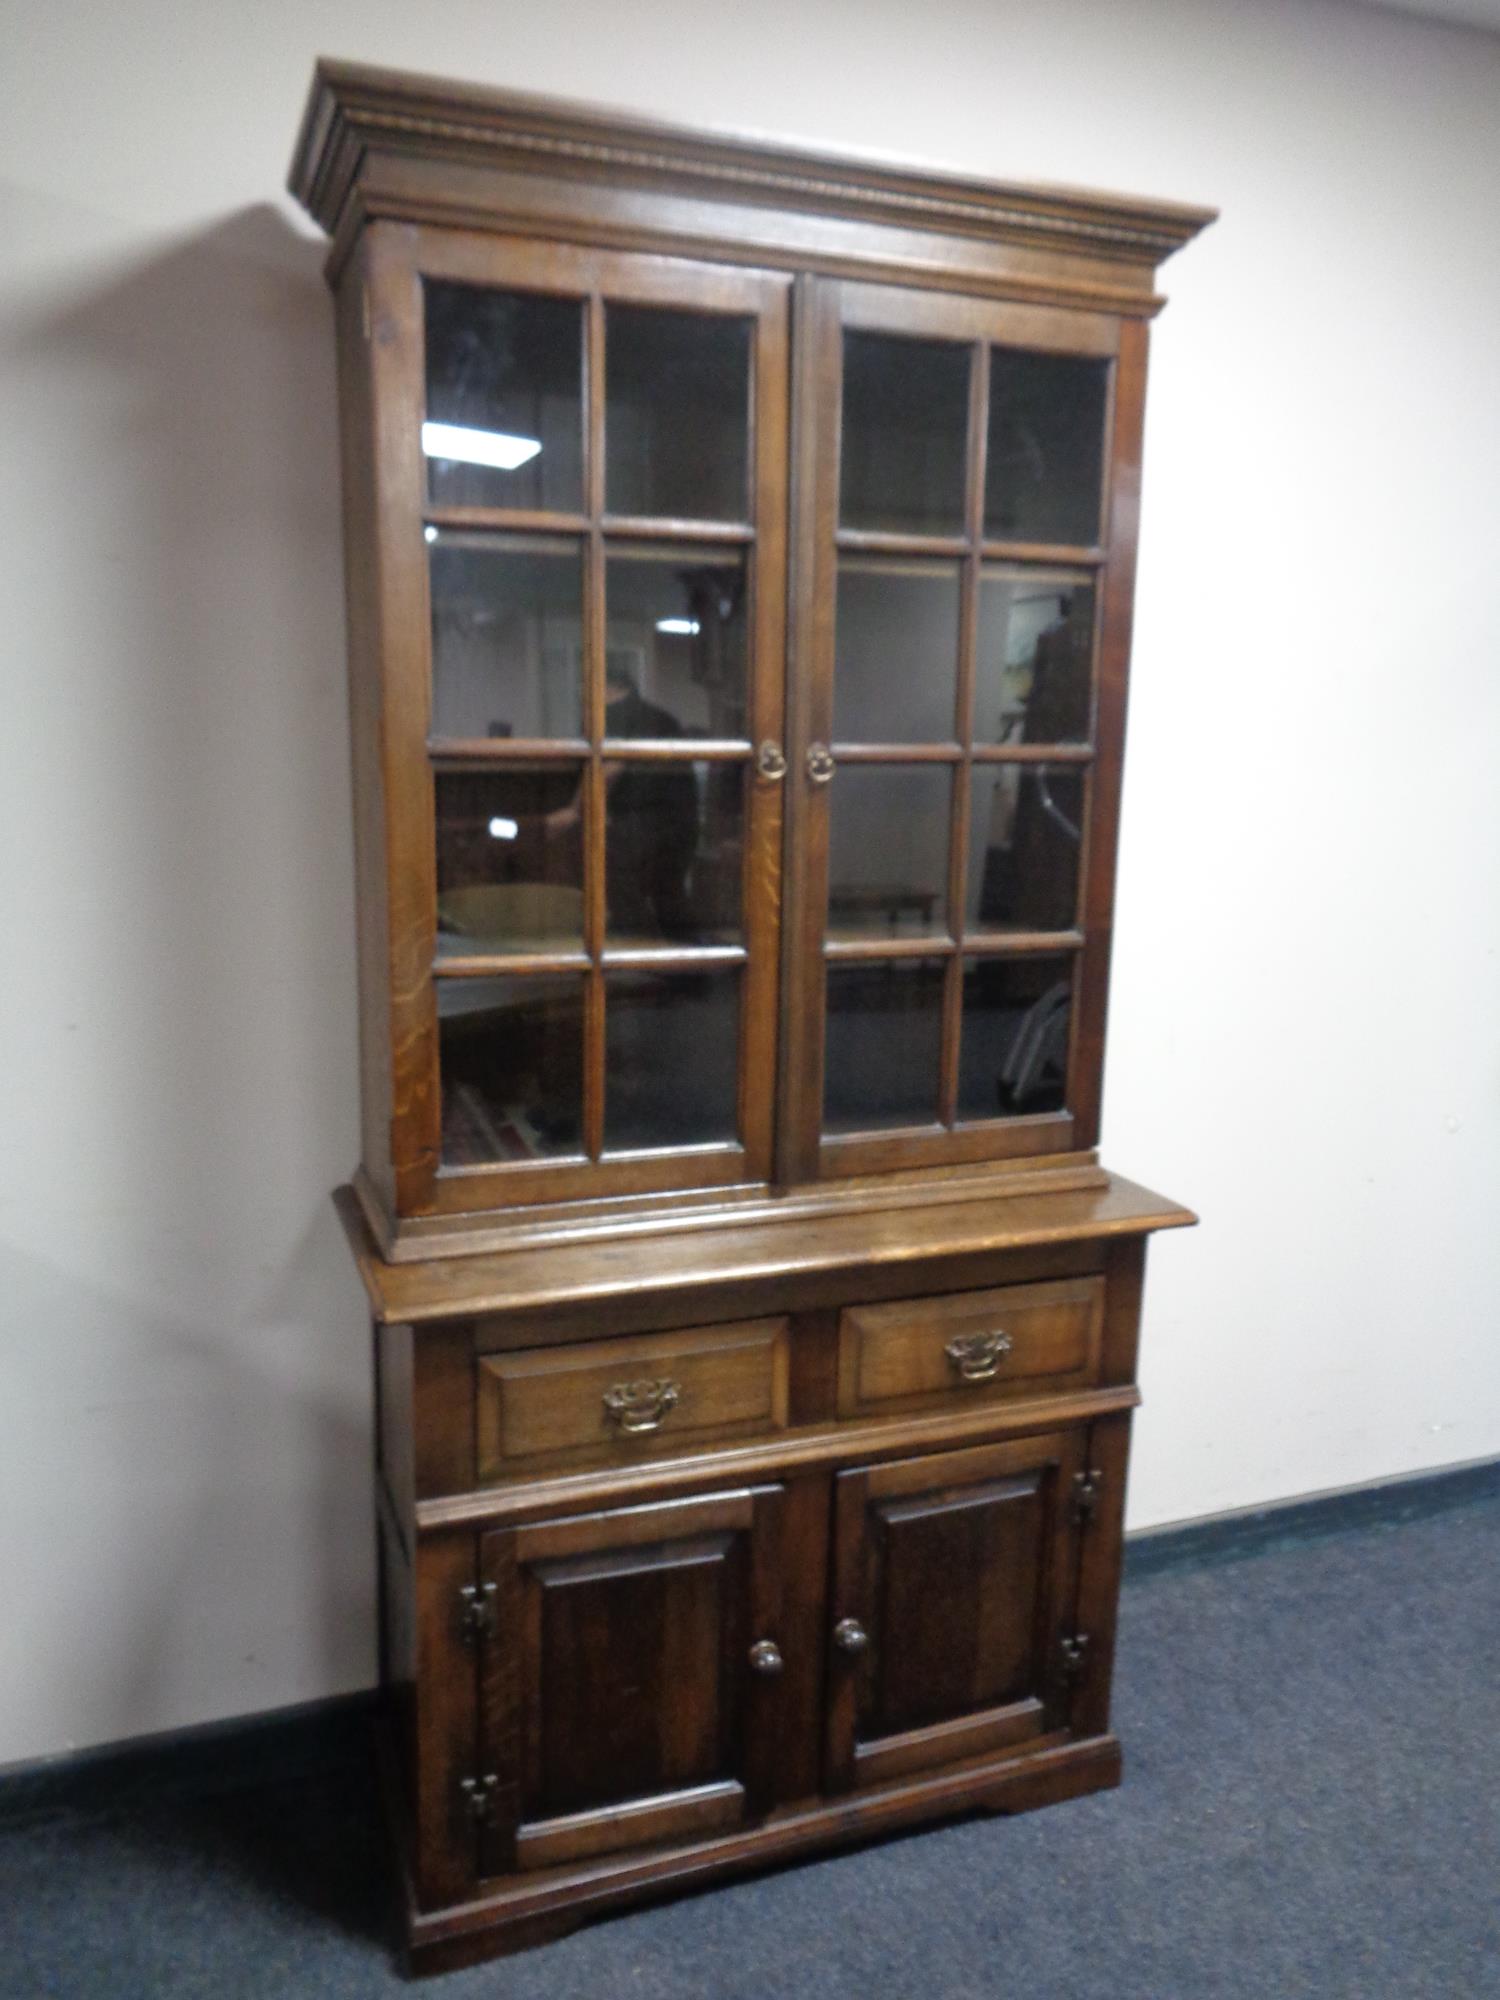 A good quality oak double door glazed bookcase with cupboards and drawers beneath,